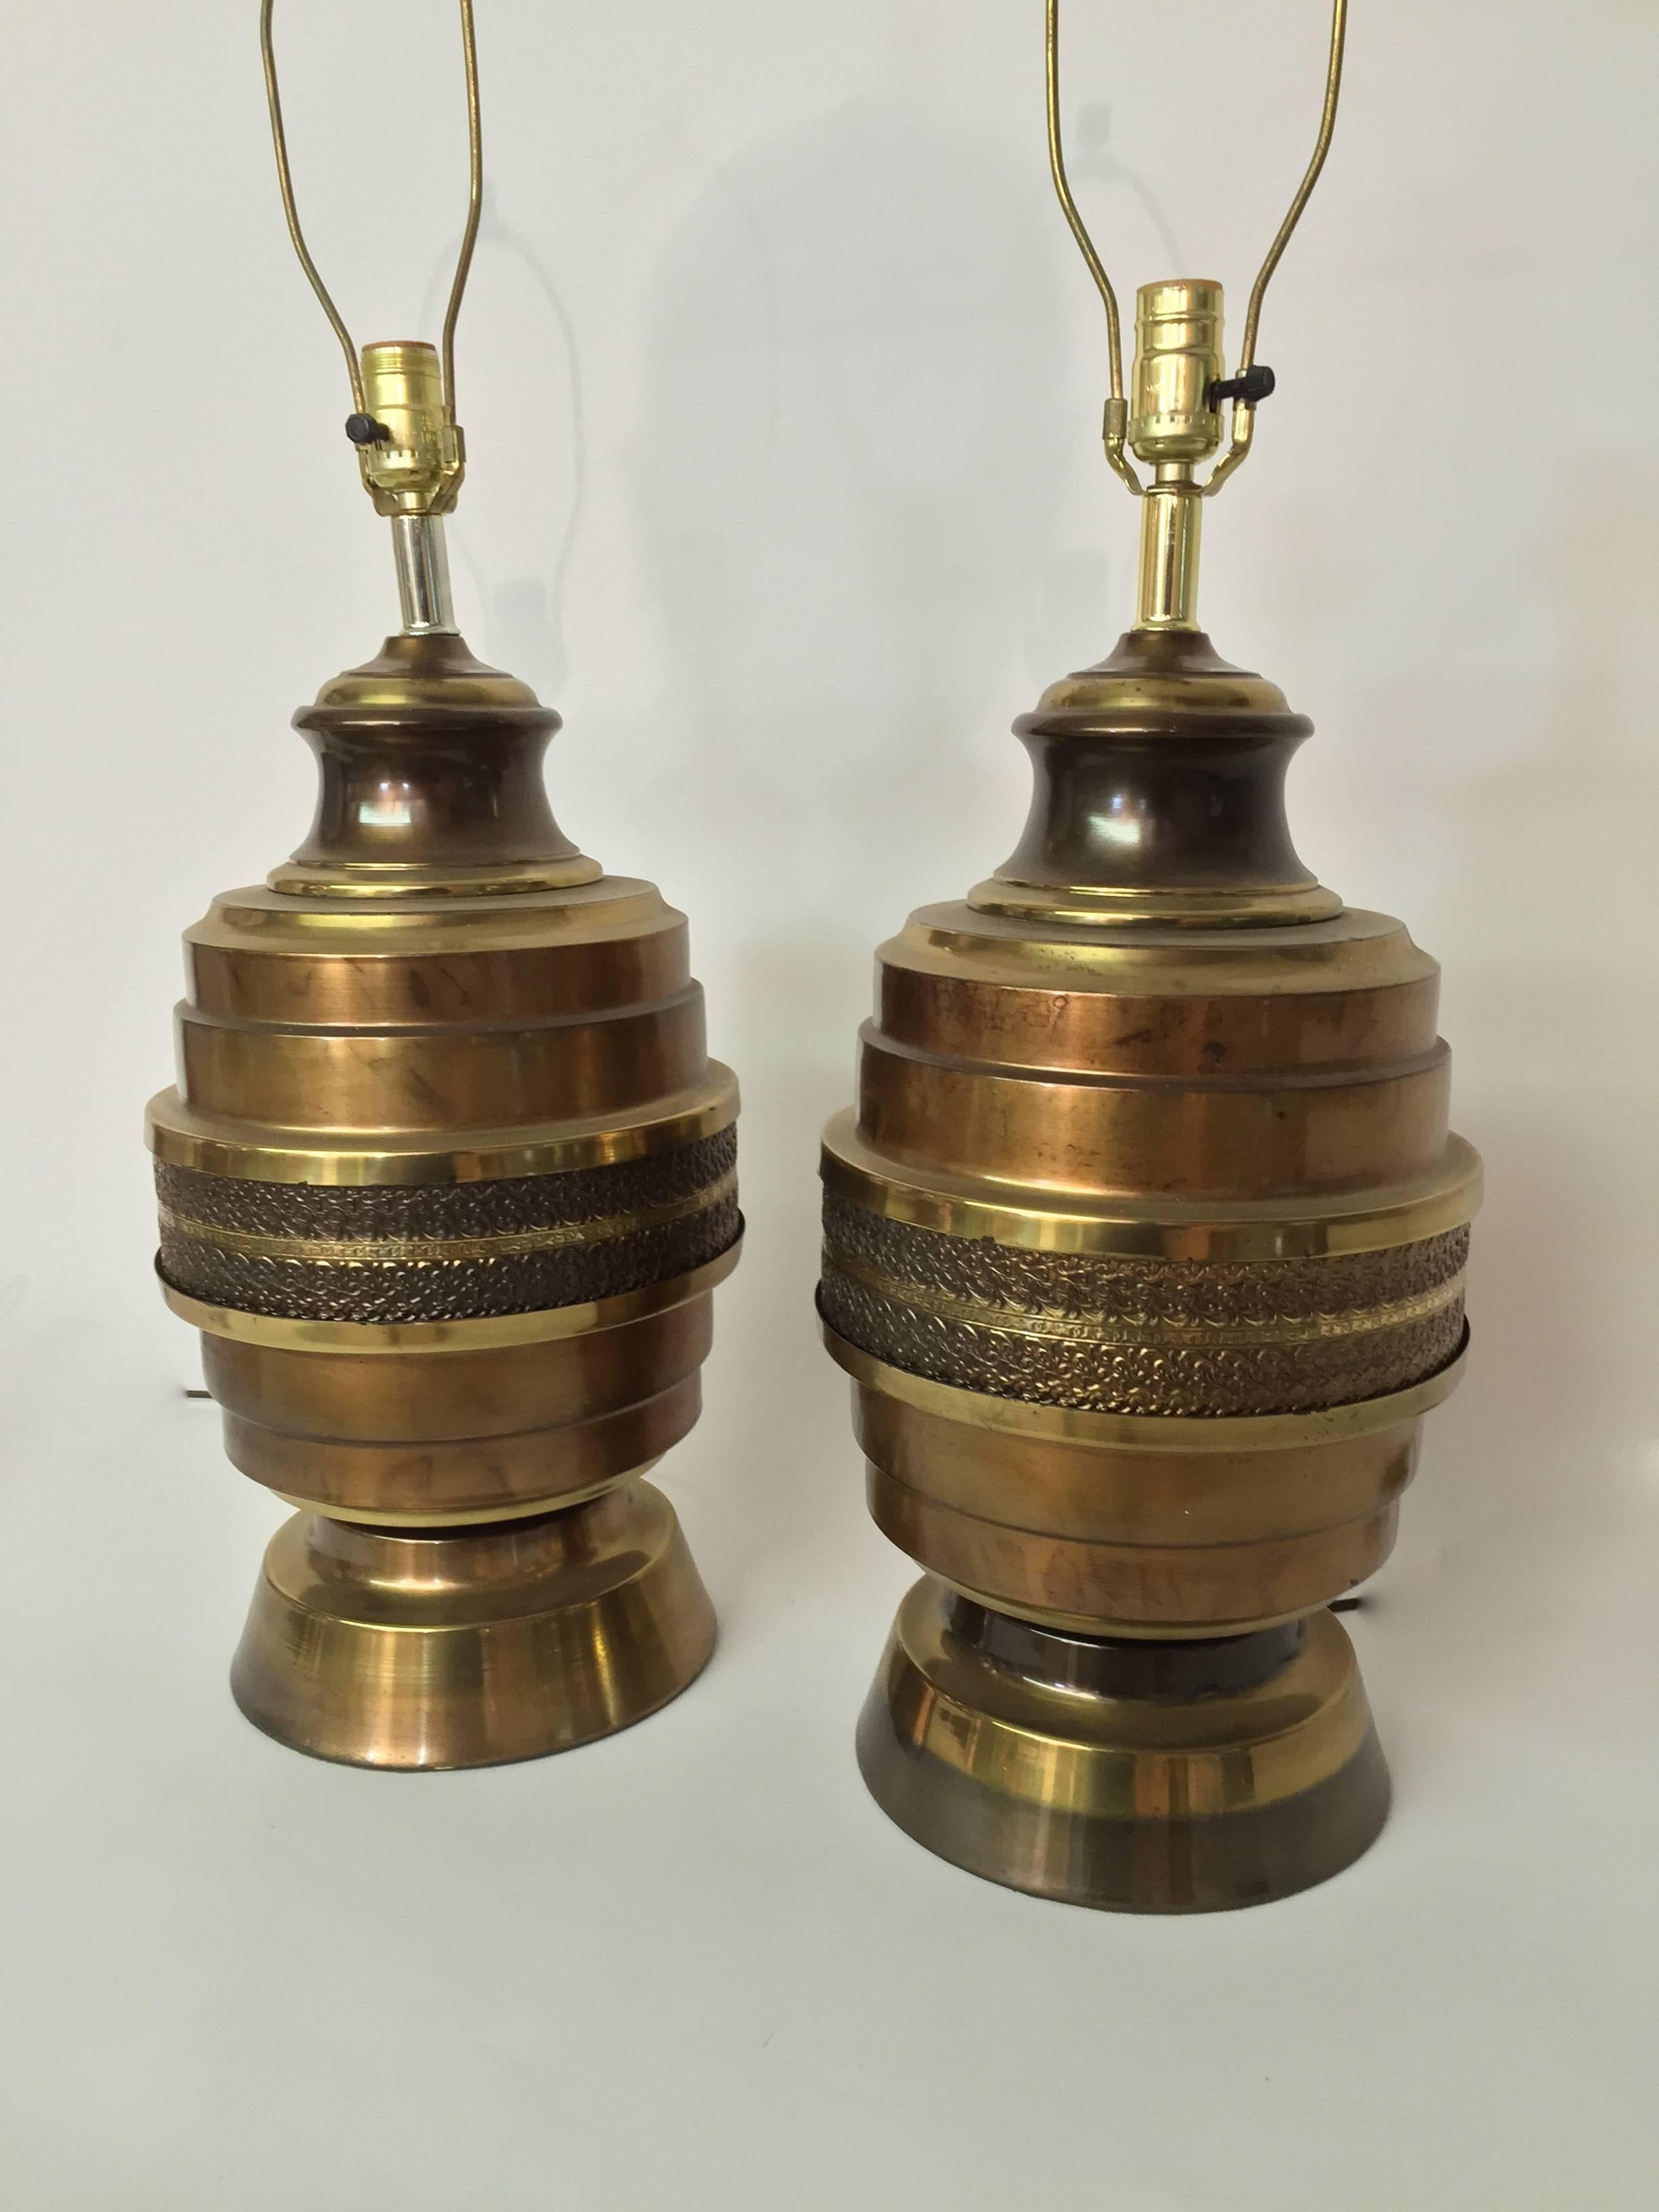 American Pair of Copper and Brass Finish Floral Repousse Lamps